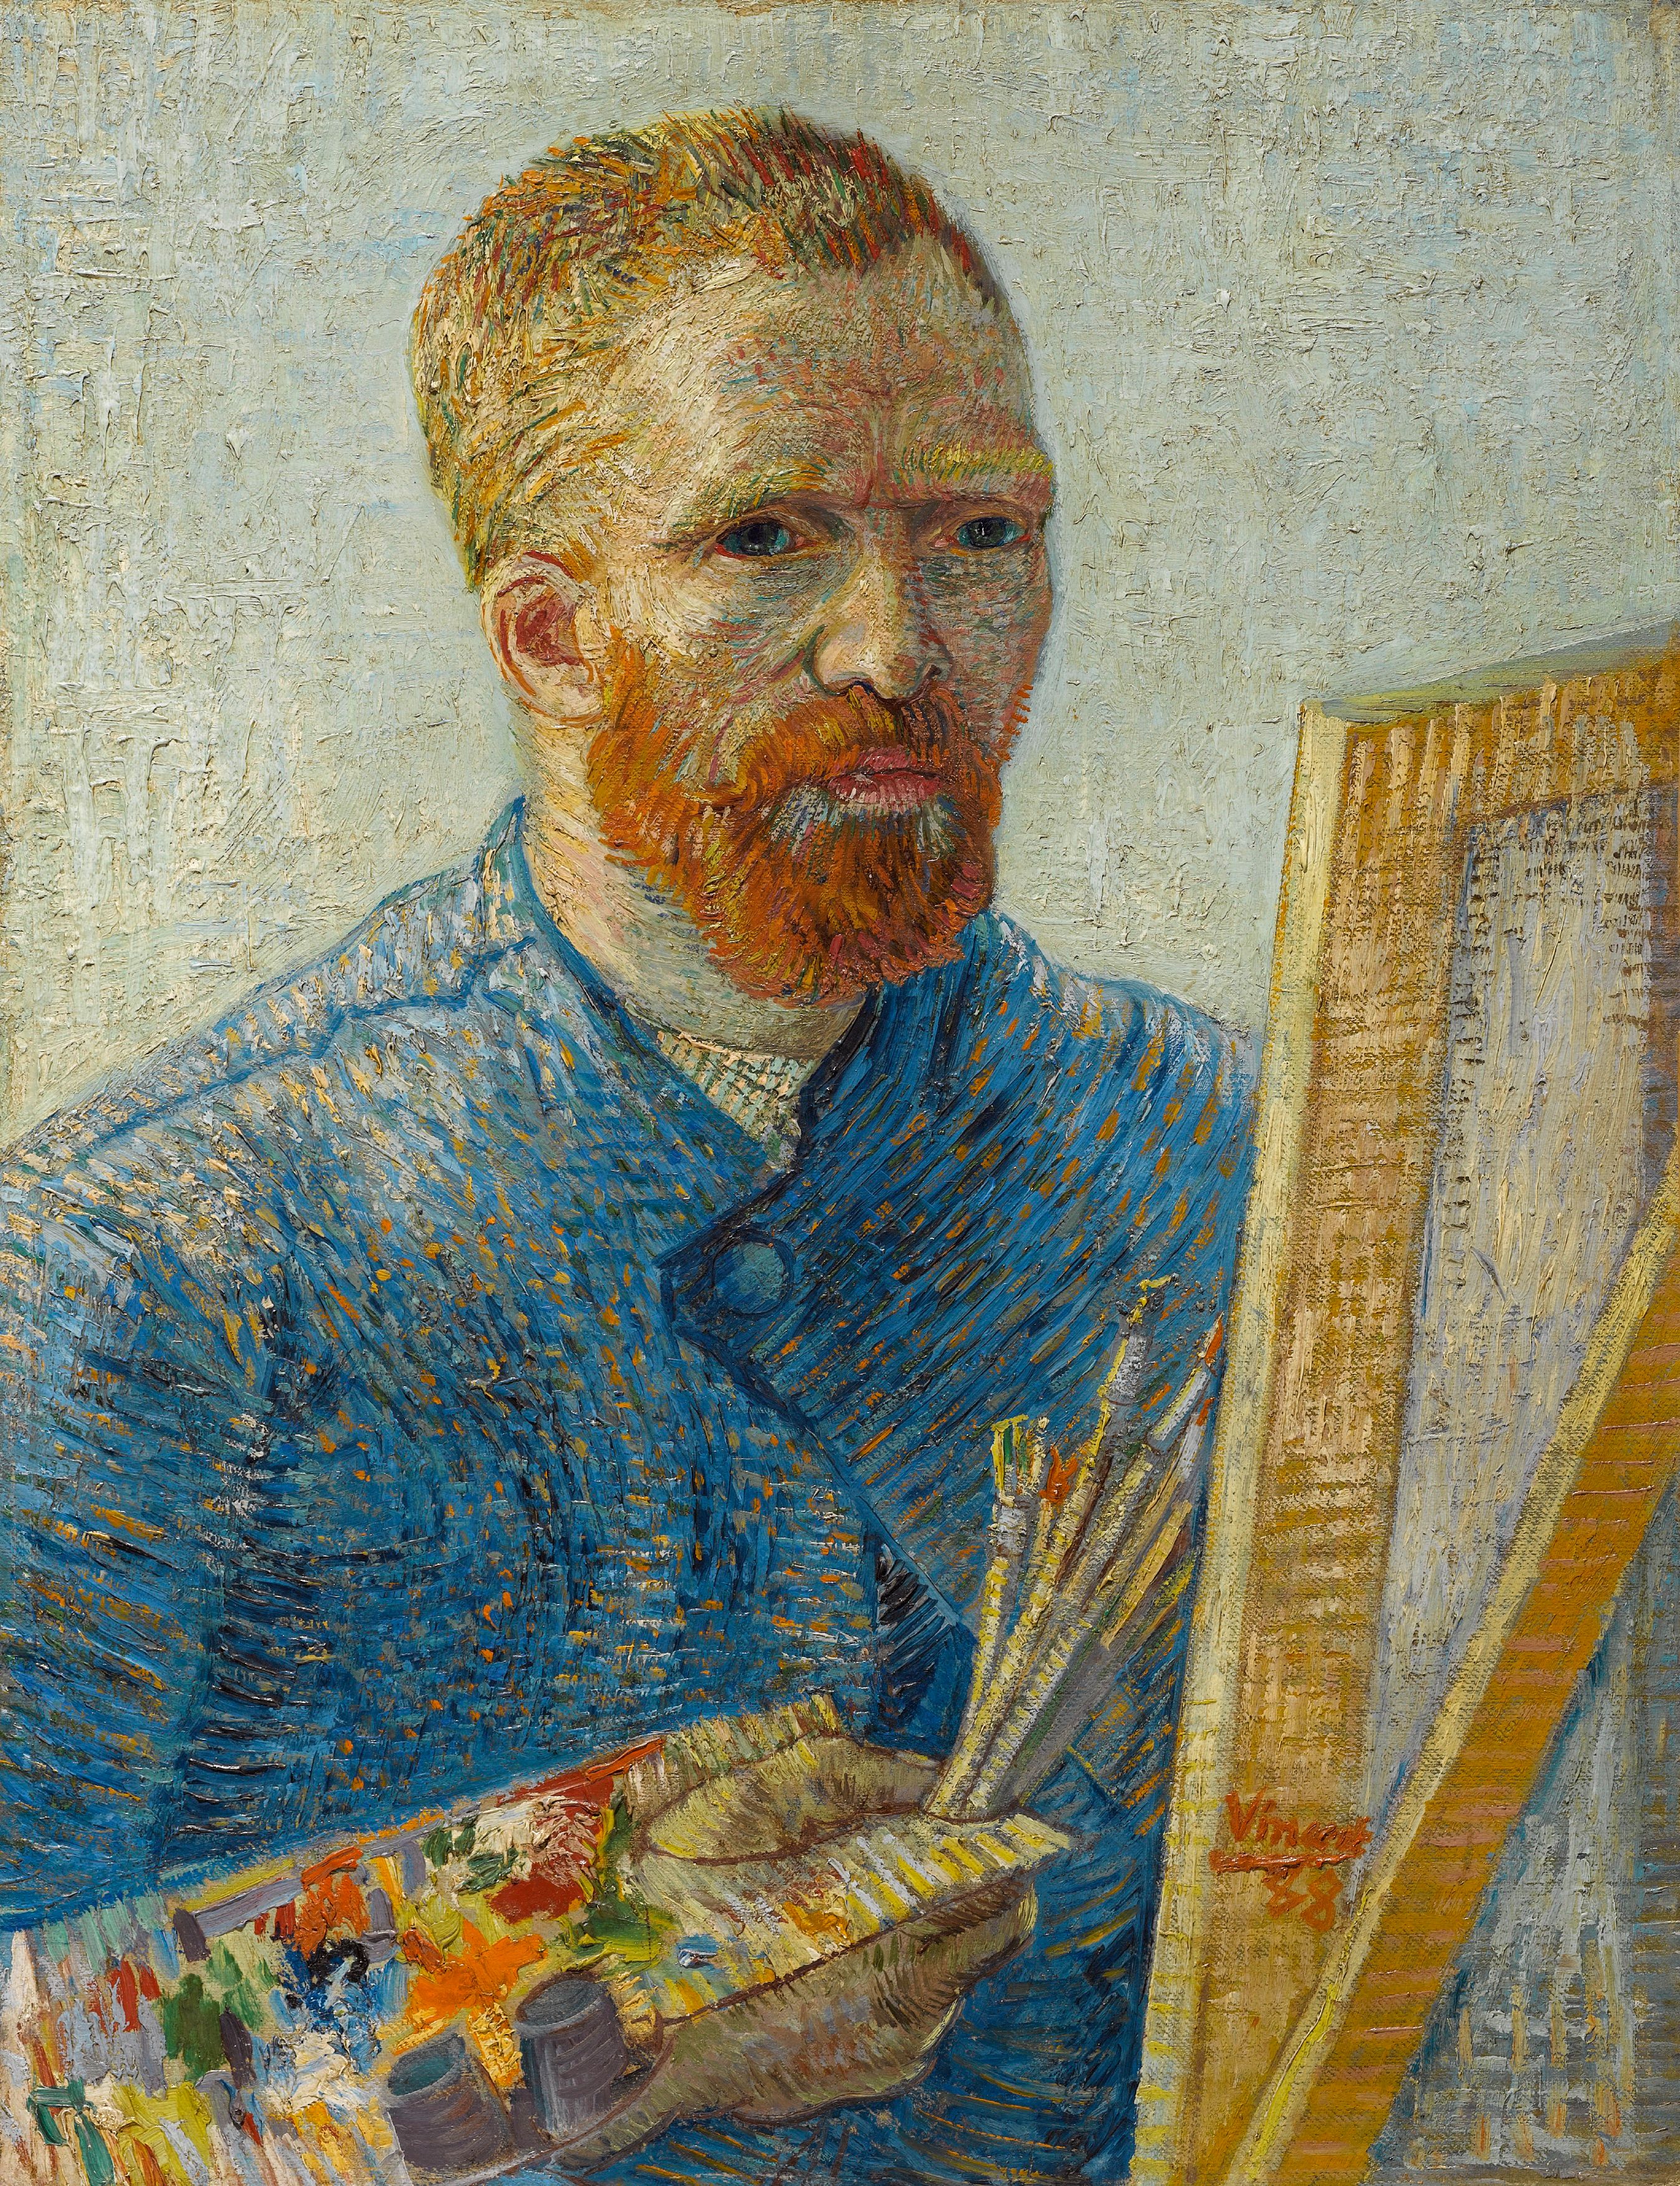 Van Gogh's self-portraits: what do they really reveal?